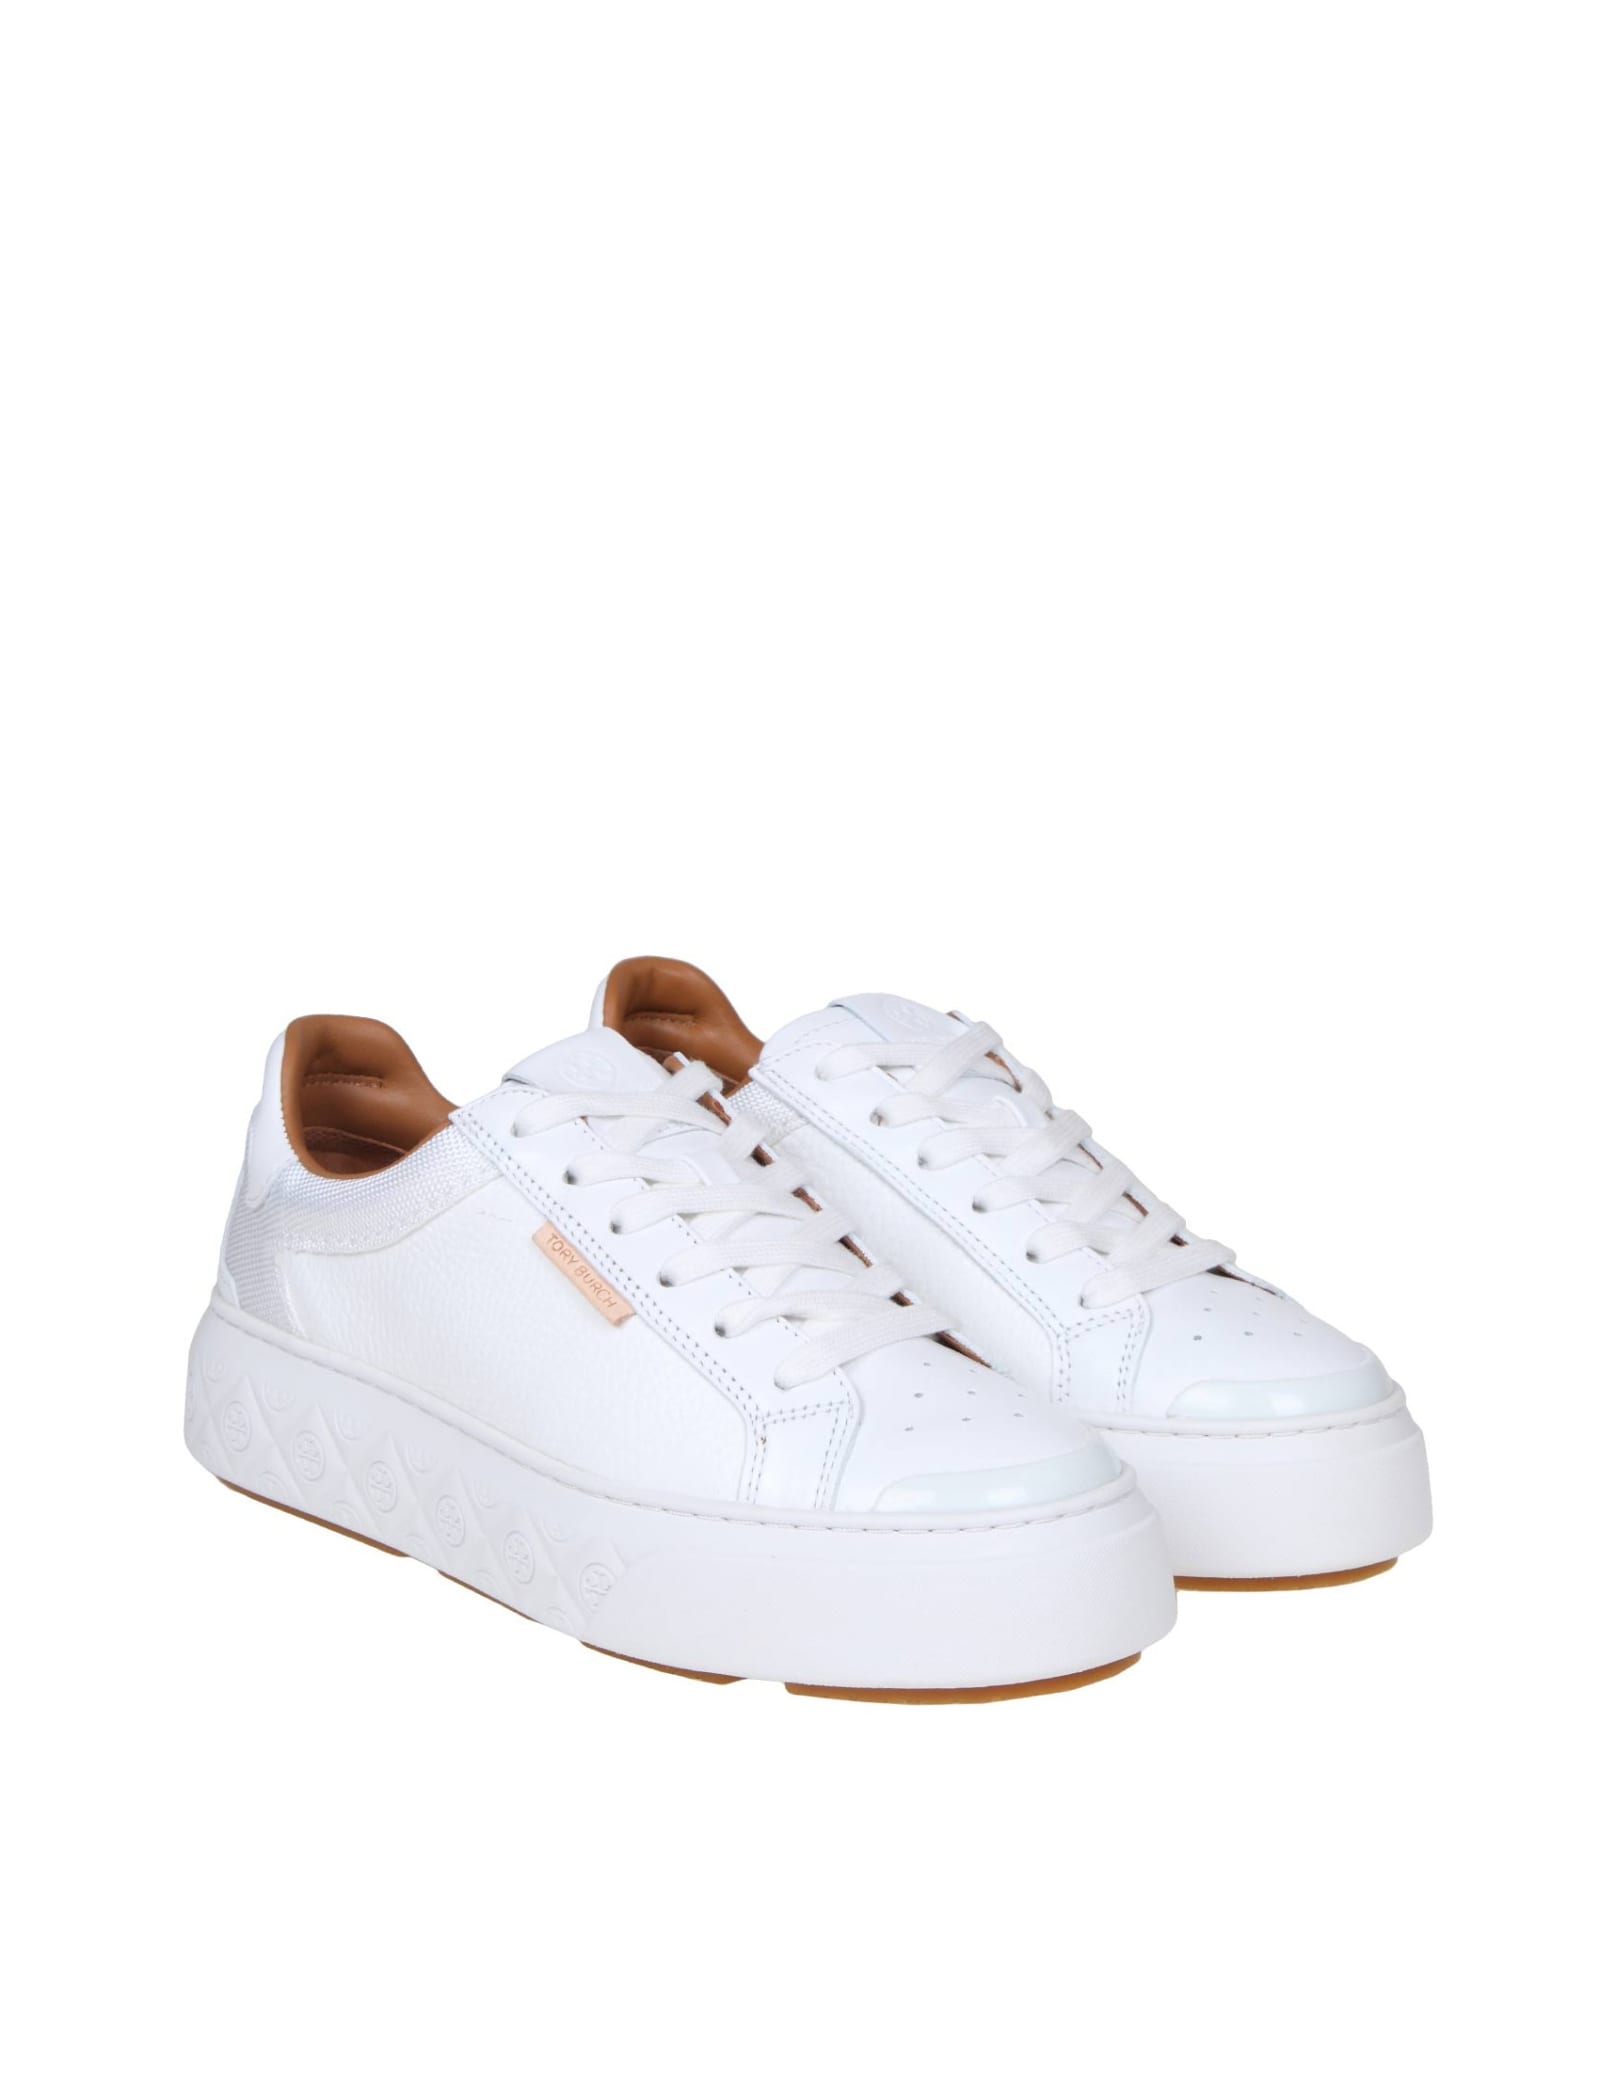 Shop Tory Burch Sneaker Ladybug In White Leather In White/white